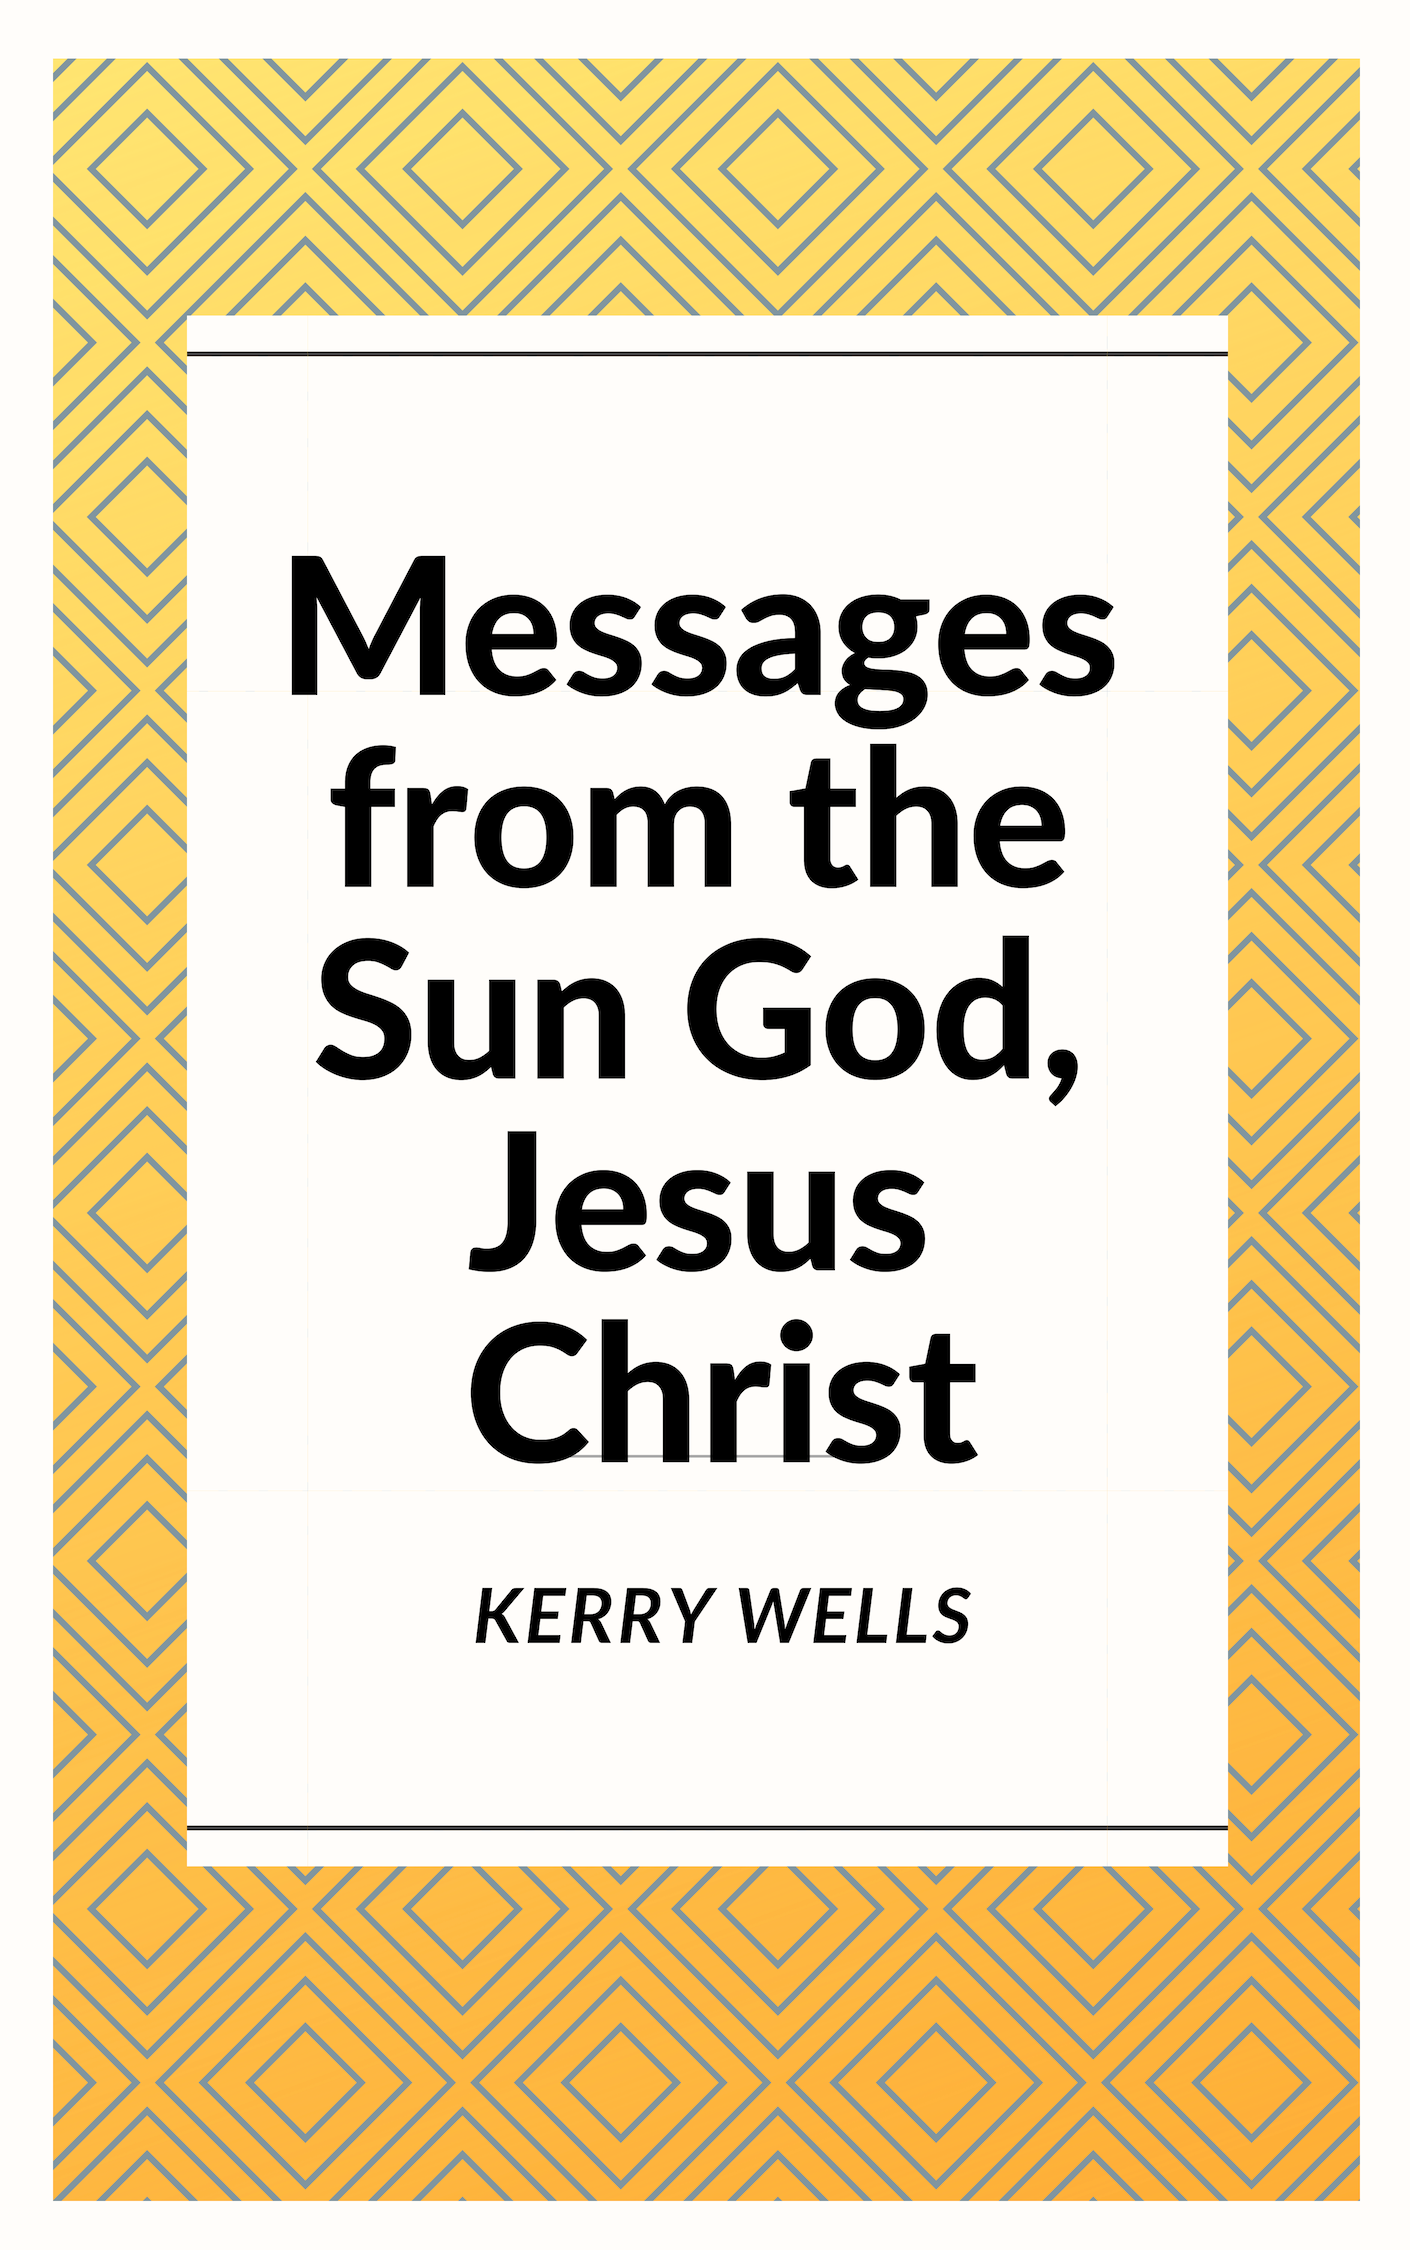 FREE: Messages from the Sun God, Jesus Christ by Kerry Wells